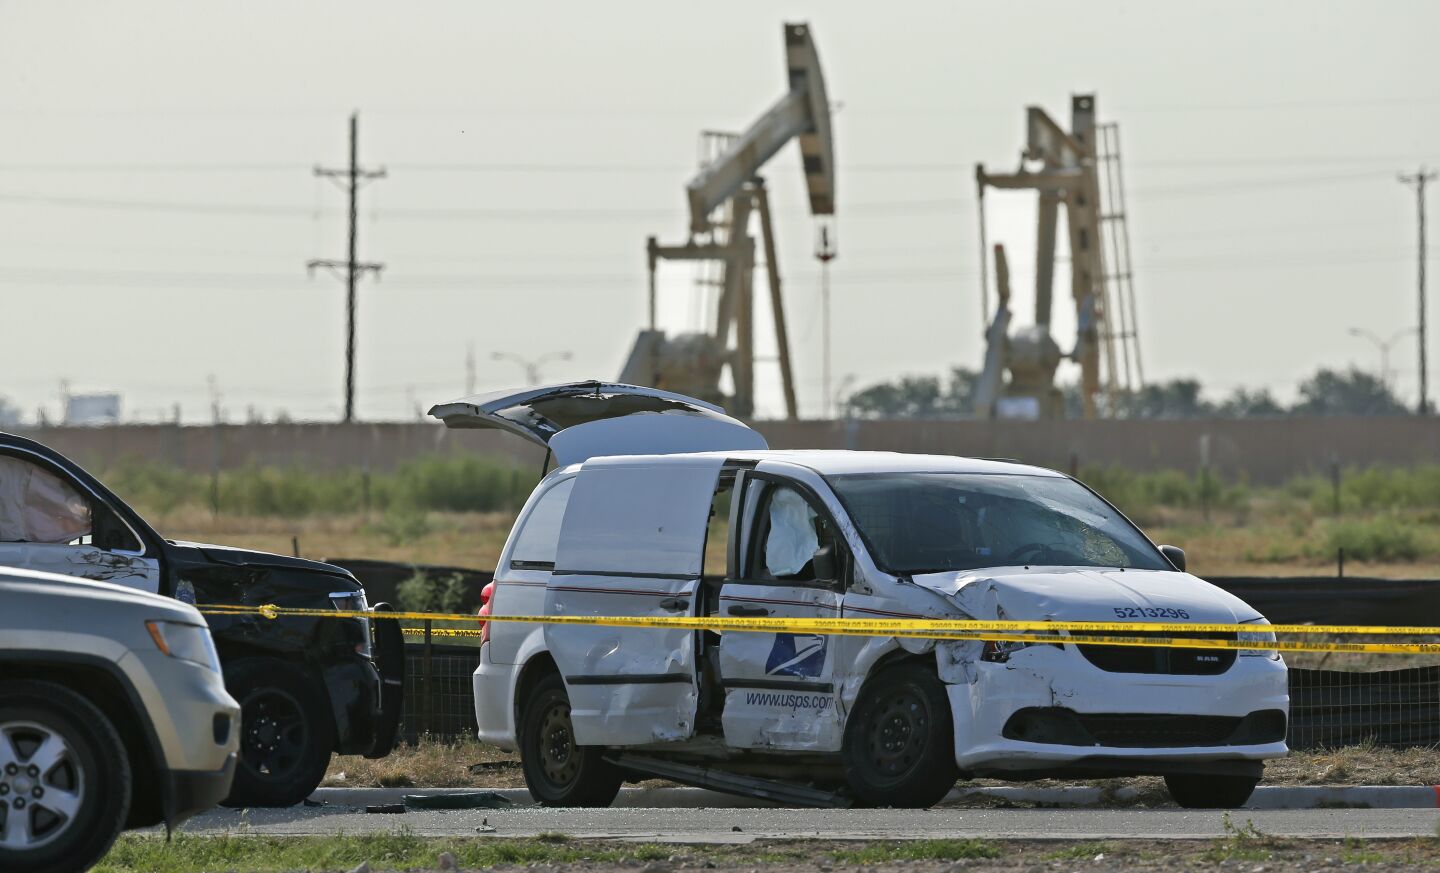 A U.S. Mail vehicle, right, which was involved in Saturday's shooting, is pictured outside the Cinergy entertainment center Sunday, Sept. 1, 2019, in Odessa, Texas. The death toll in the West Texas shooting rampage increased Sunday as authorities investigated why a man stopped by state troopers for failing to signal a left turn opened fire on them and fled, shooting over a dozen people as he drove before being killed by officers outside a movie theater. A police vehicle is partially blocked at left. (AP Photo/Sue Ogrocki)